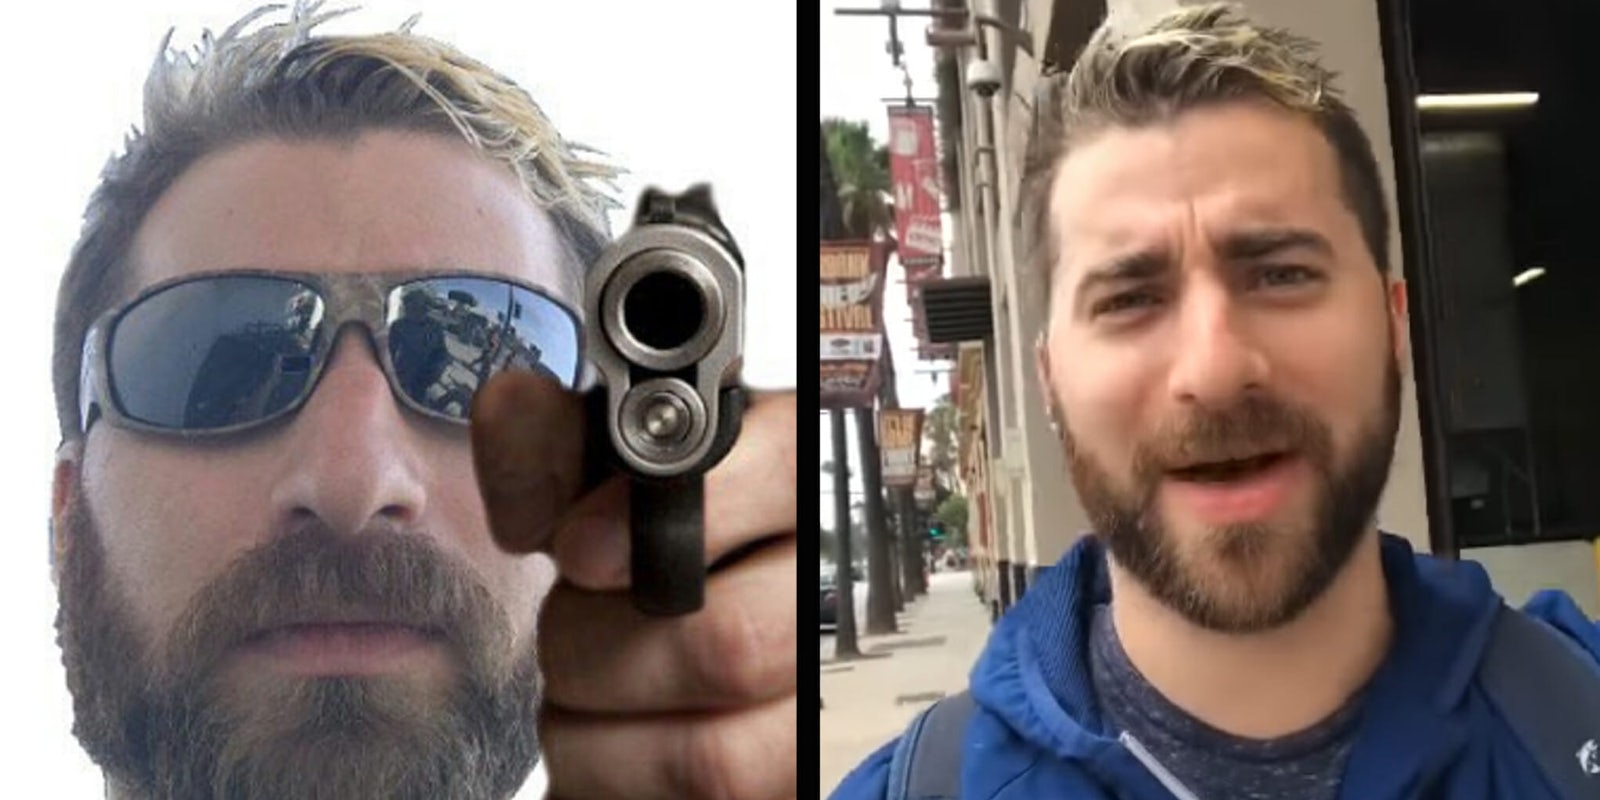 Baked Alaska is suing AJ Plus for tweeting out a picture that he tweeted out himself less than a month prior.